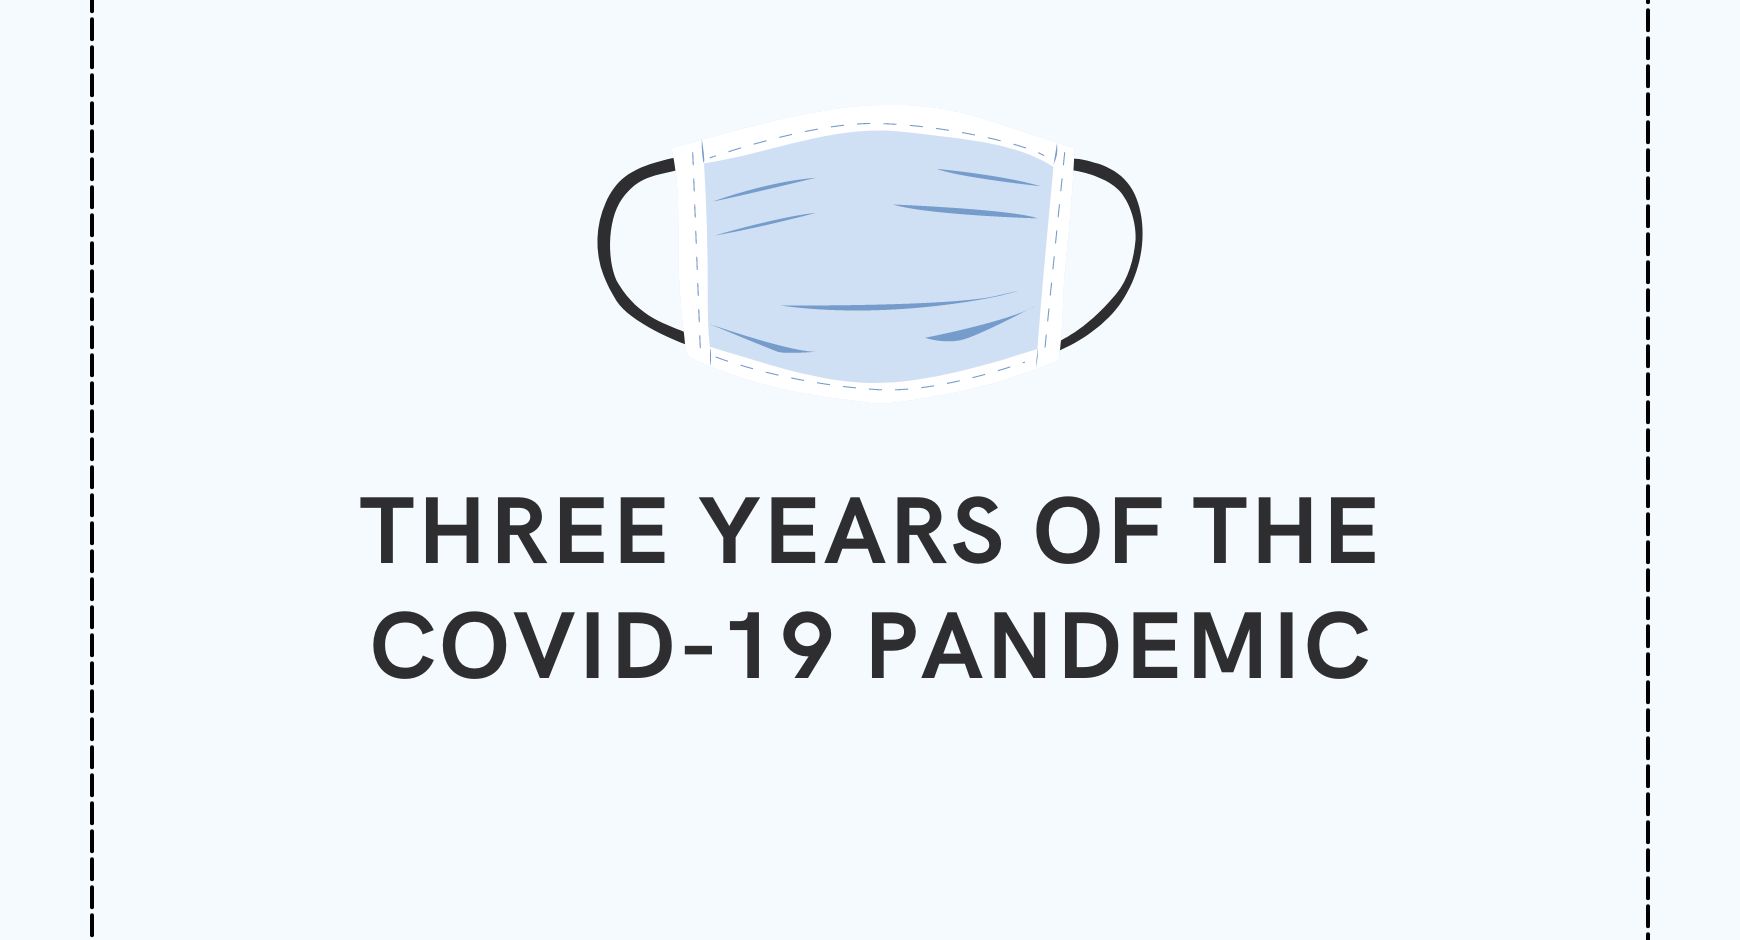 A medical mask above words that read "Three Years of the COVID-19 Pandemic"